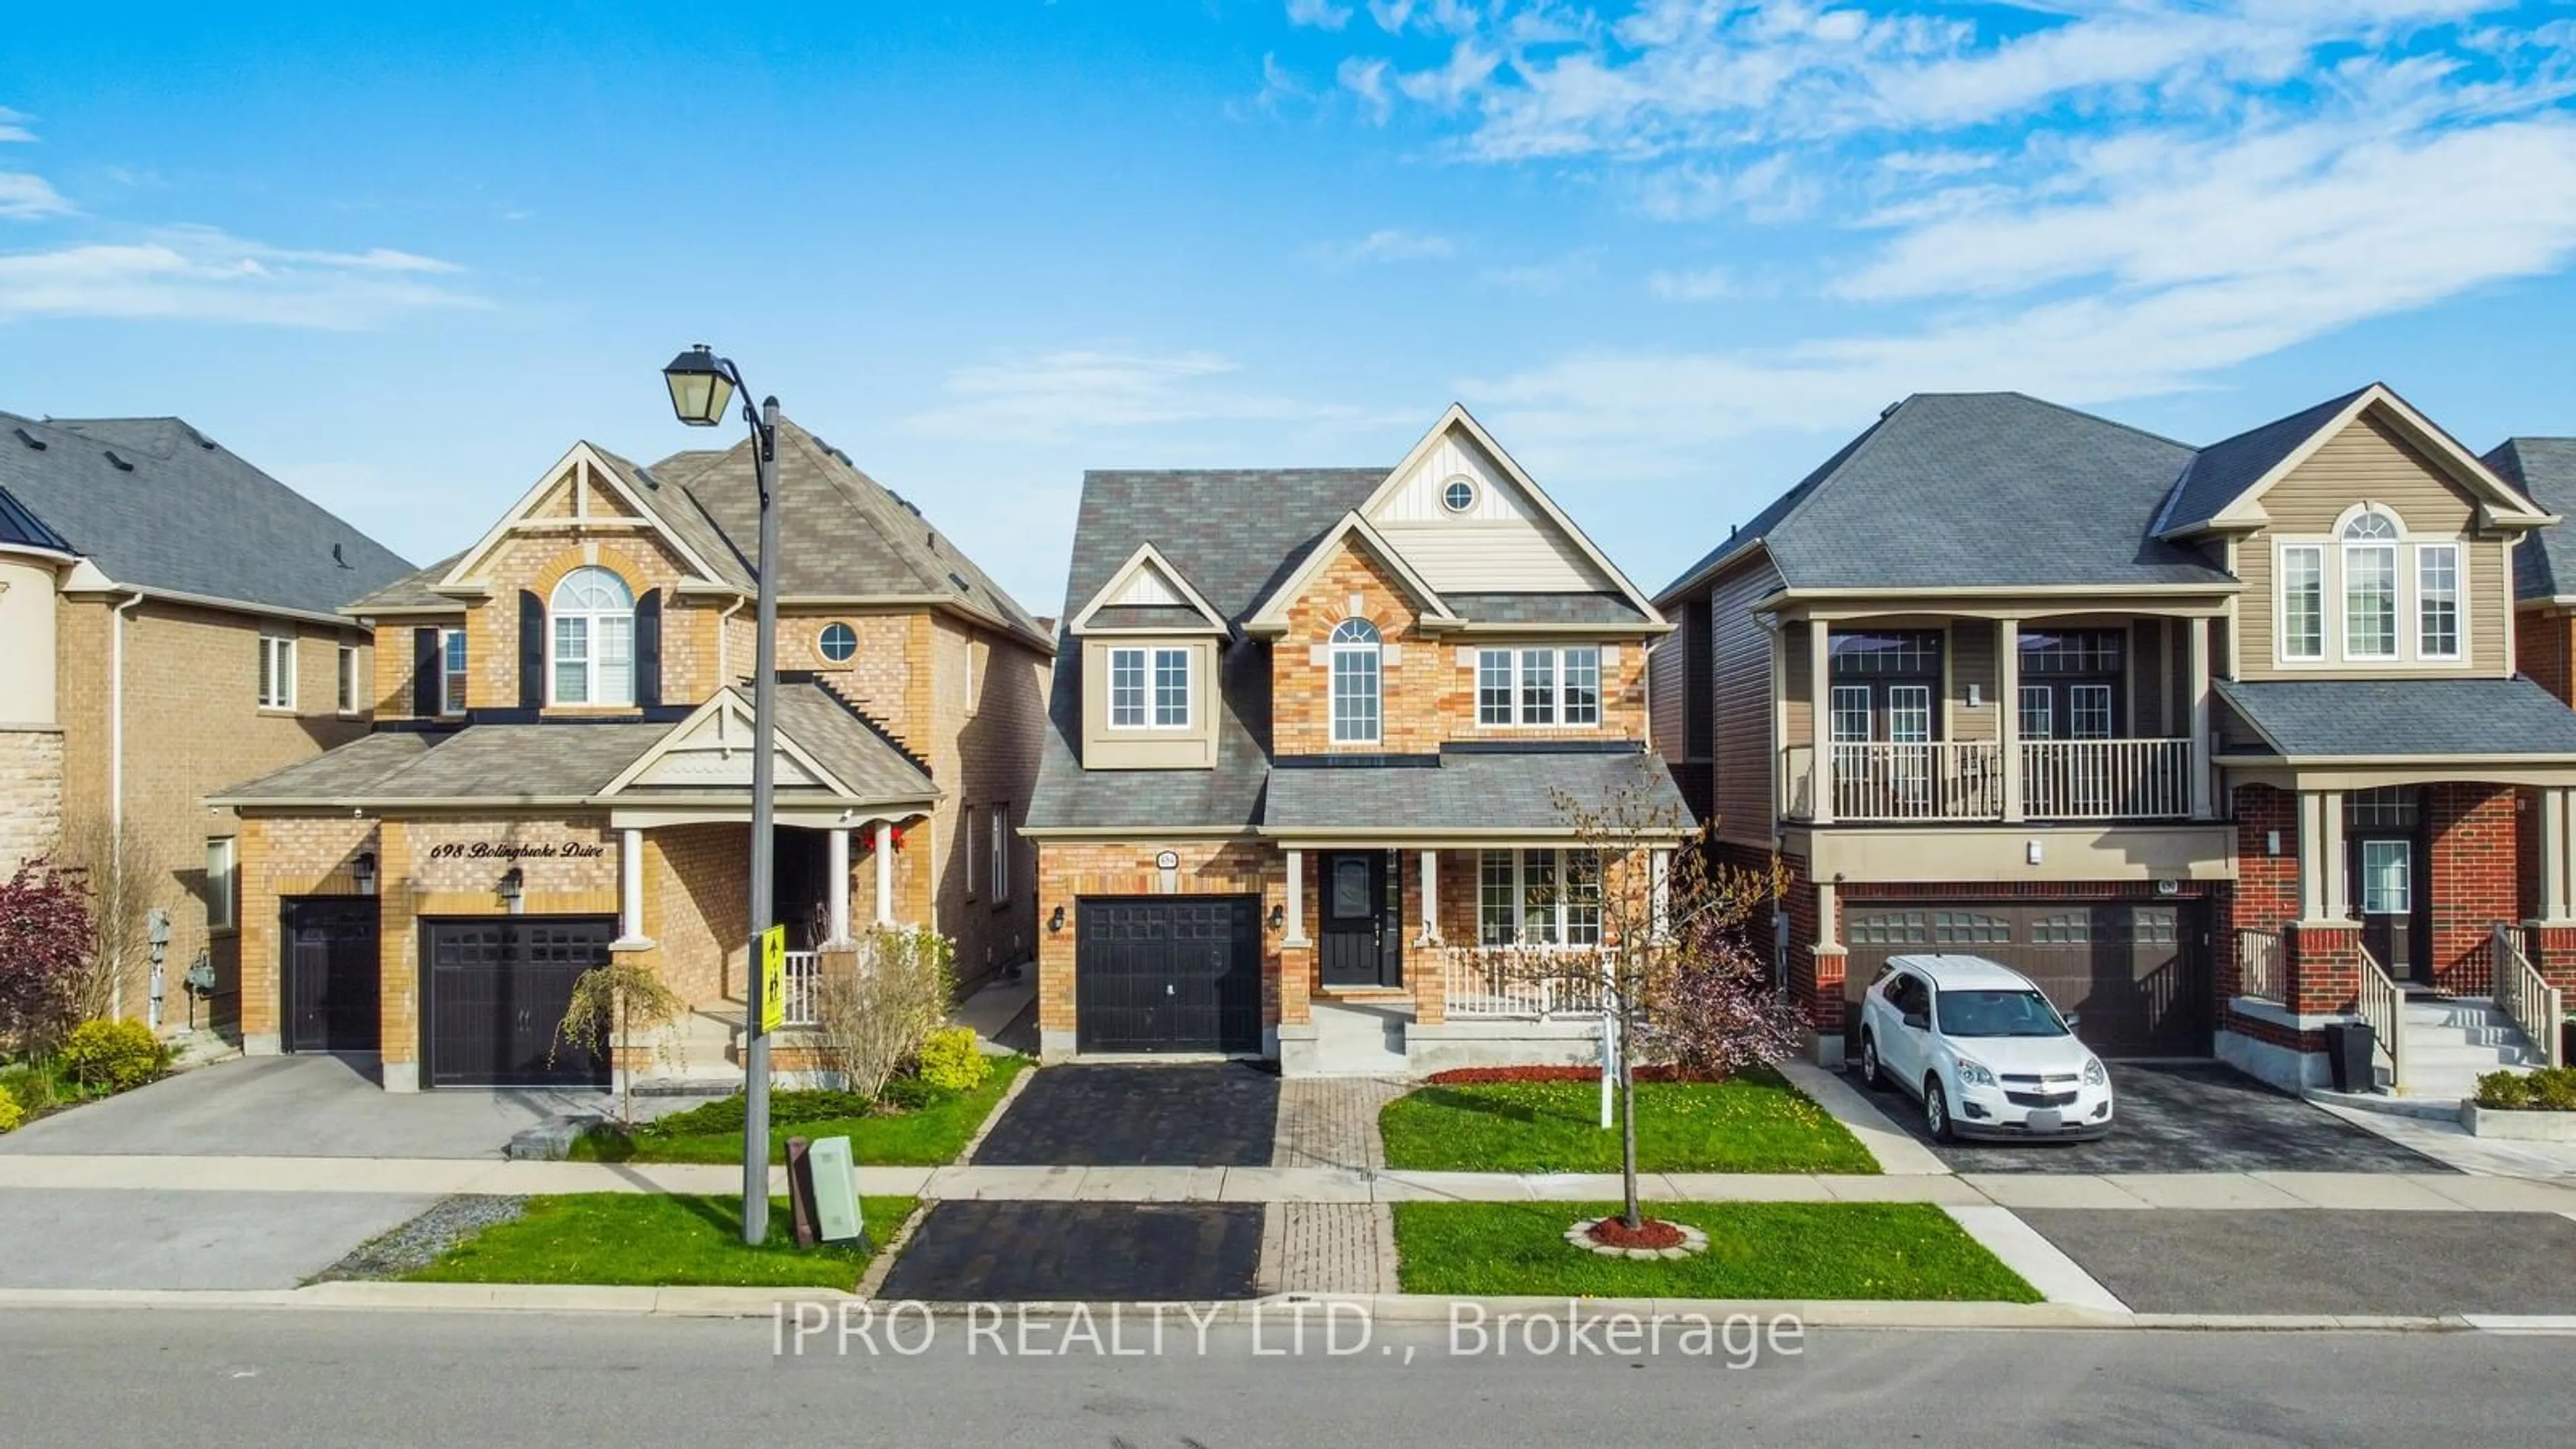 Frontside or backside of a home for 694 Bolingbroke Dr, Milton Ontario L9T 6Z3